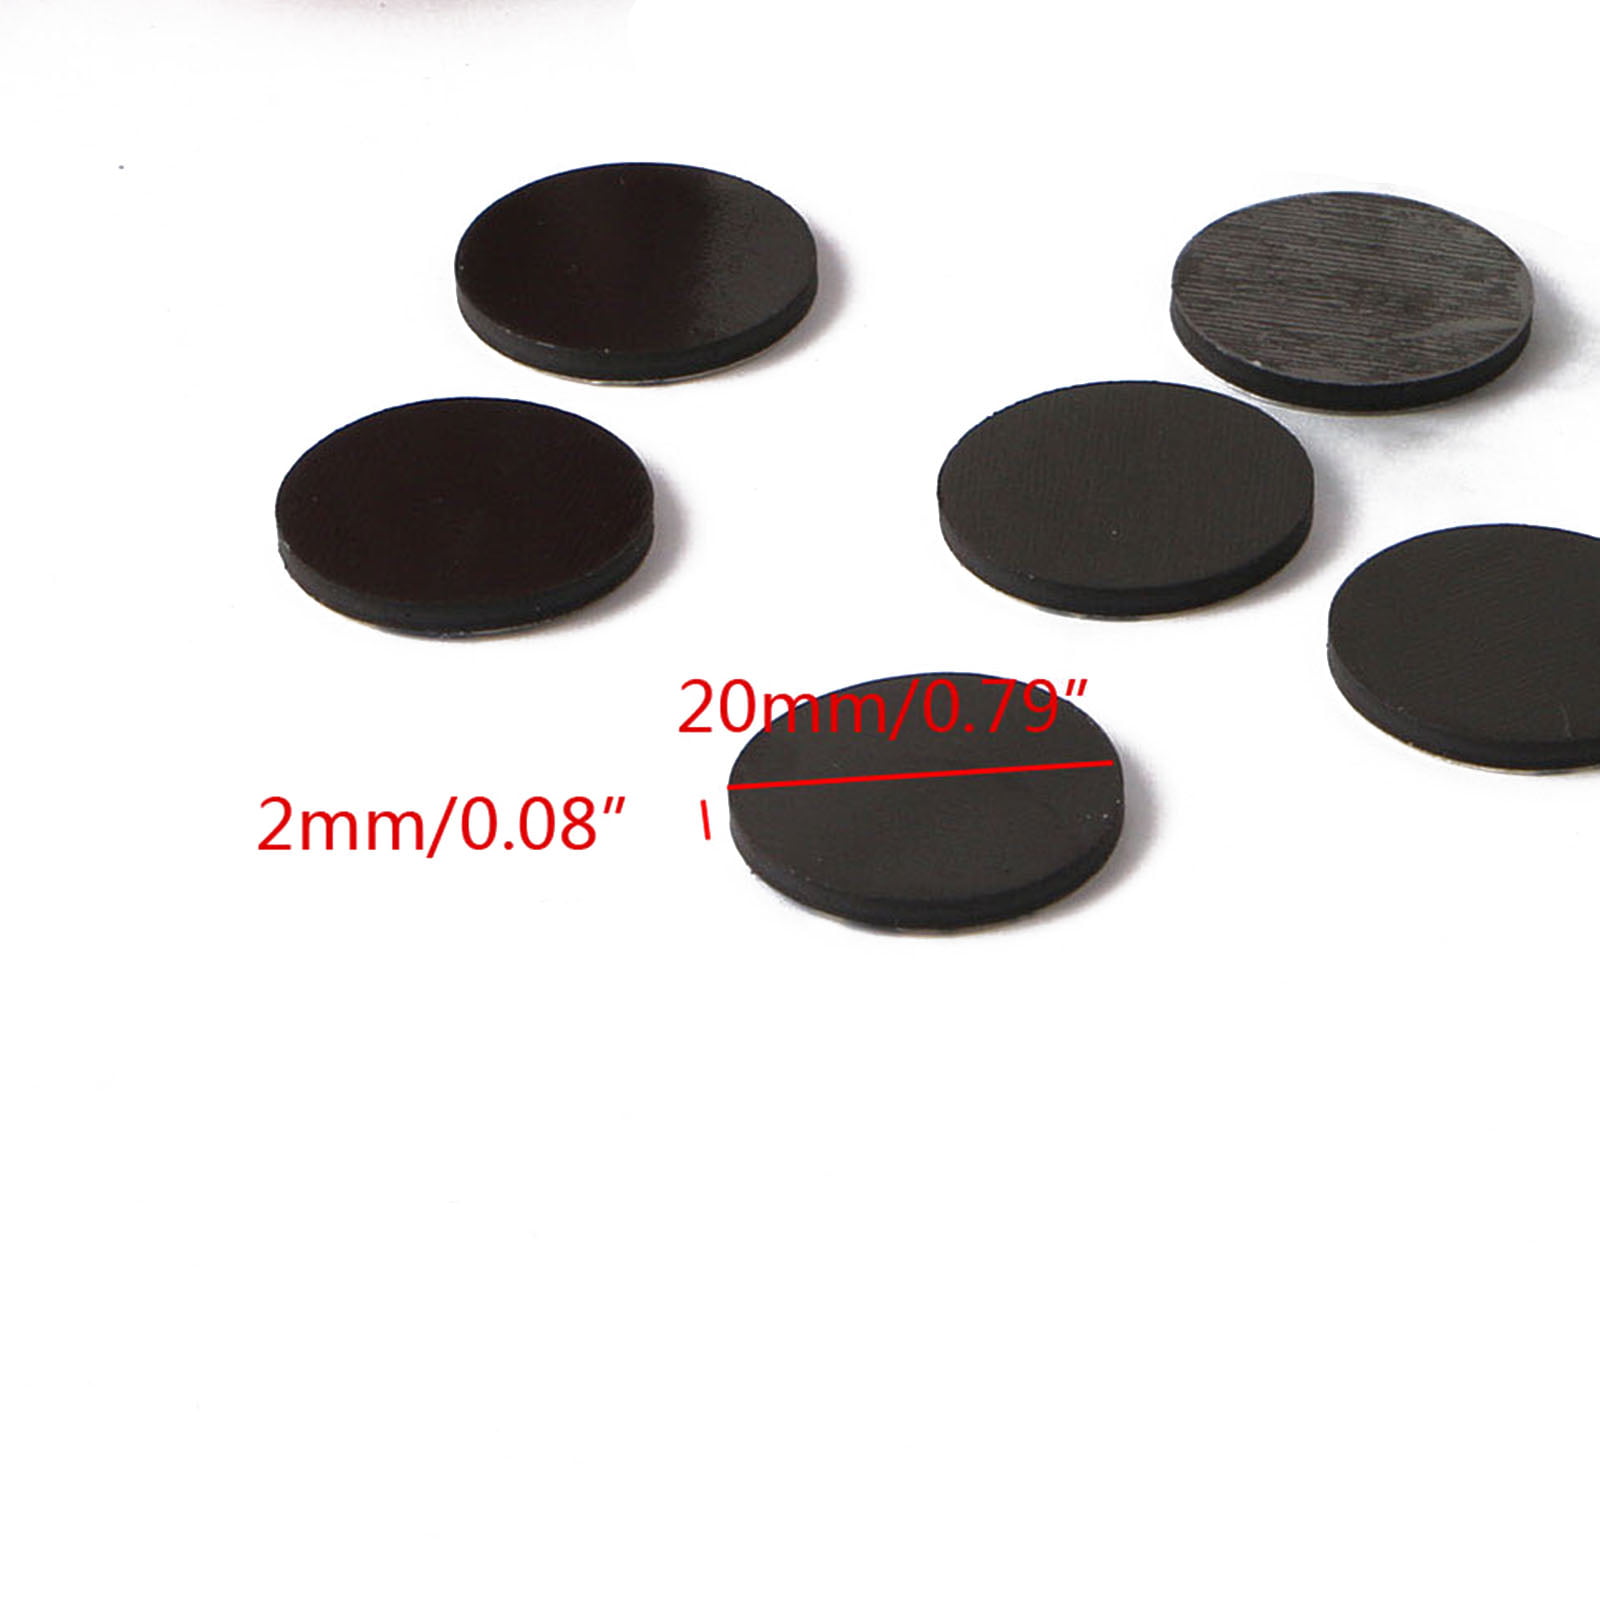 Sardfxul Small Magnets for Crafts Round Grade 4 Strong Magnets Great for  Creating Fridge Magnets & Other Magnetic Craft Projects 